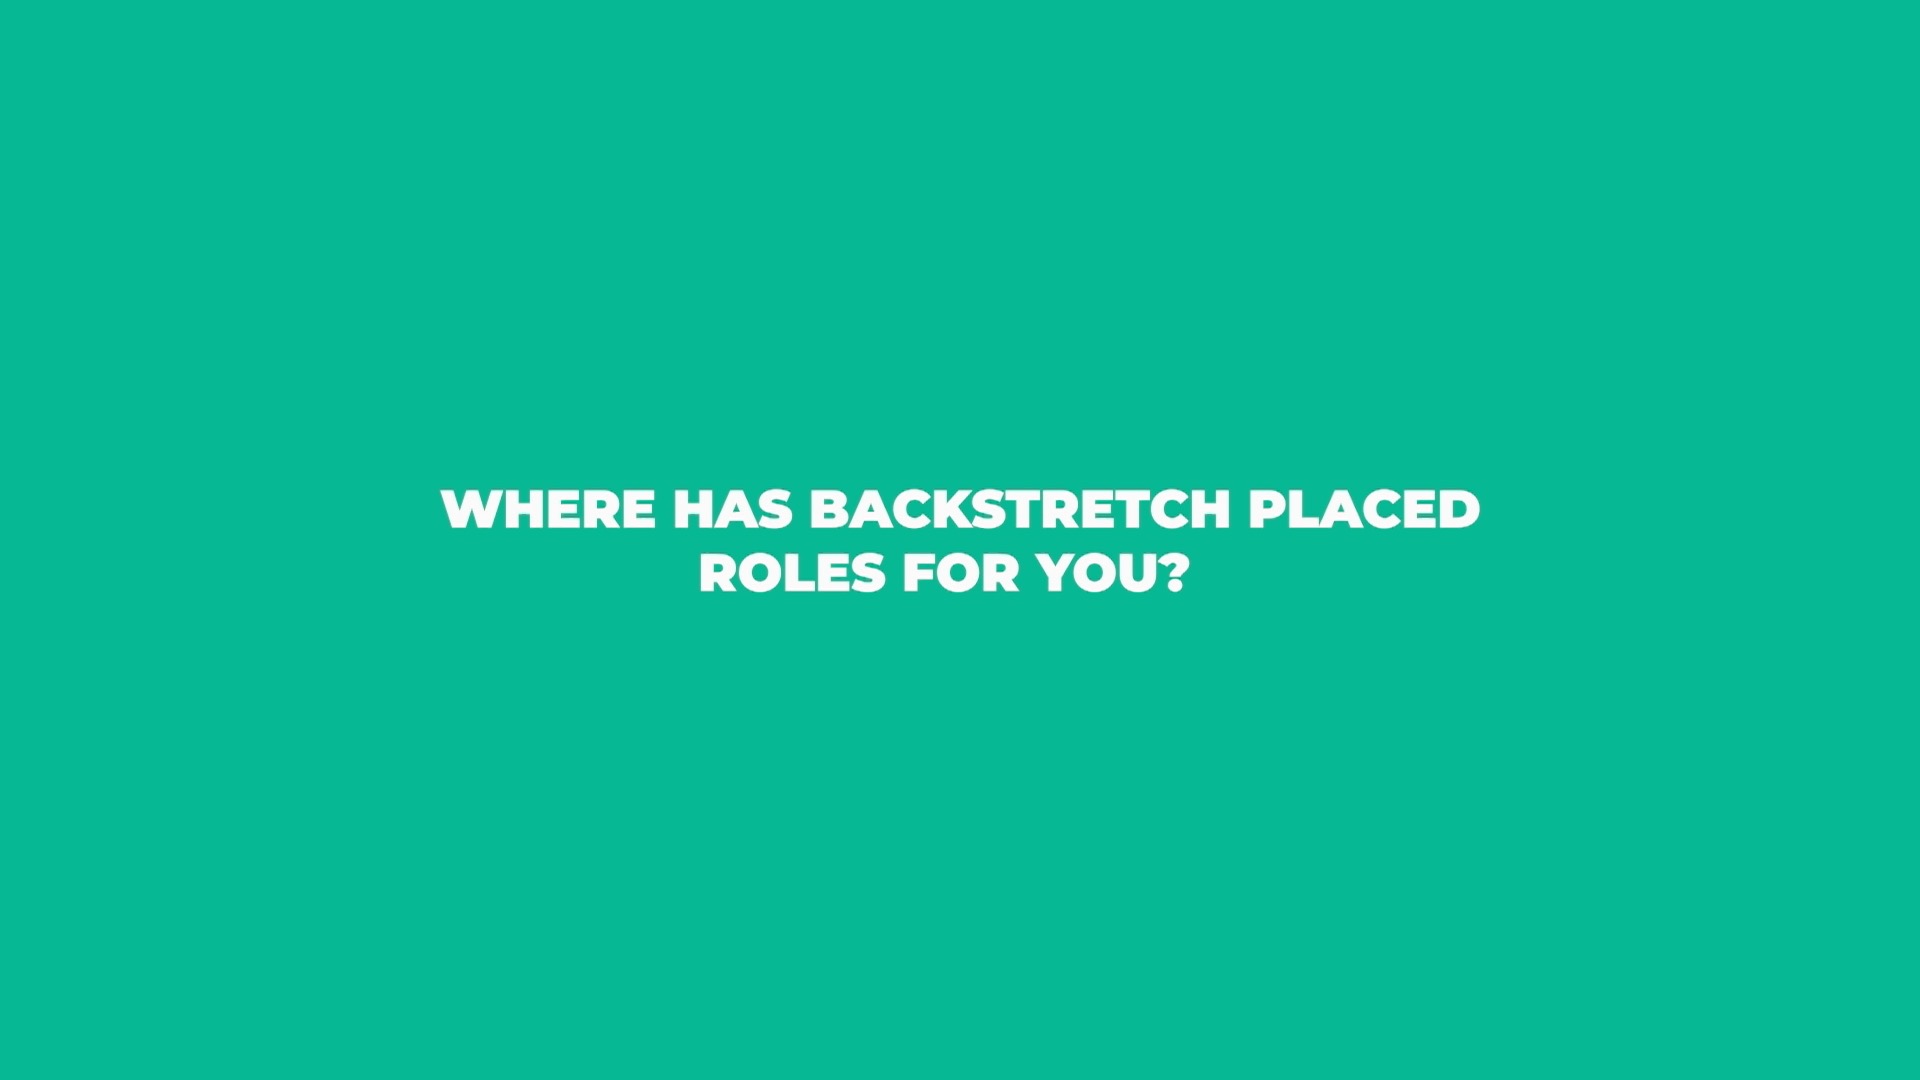 Where has BackStretch placed roles for you?